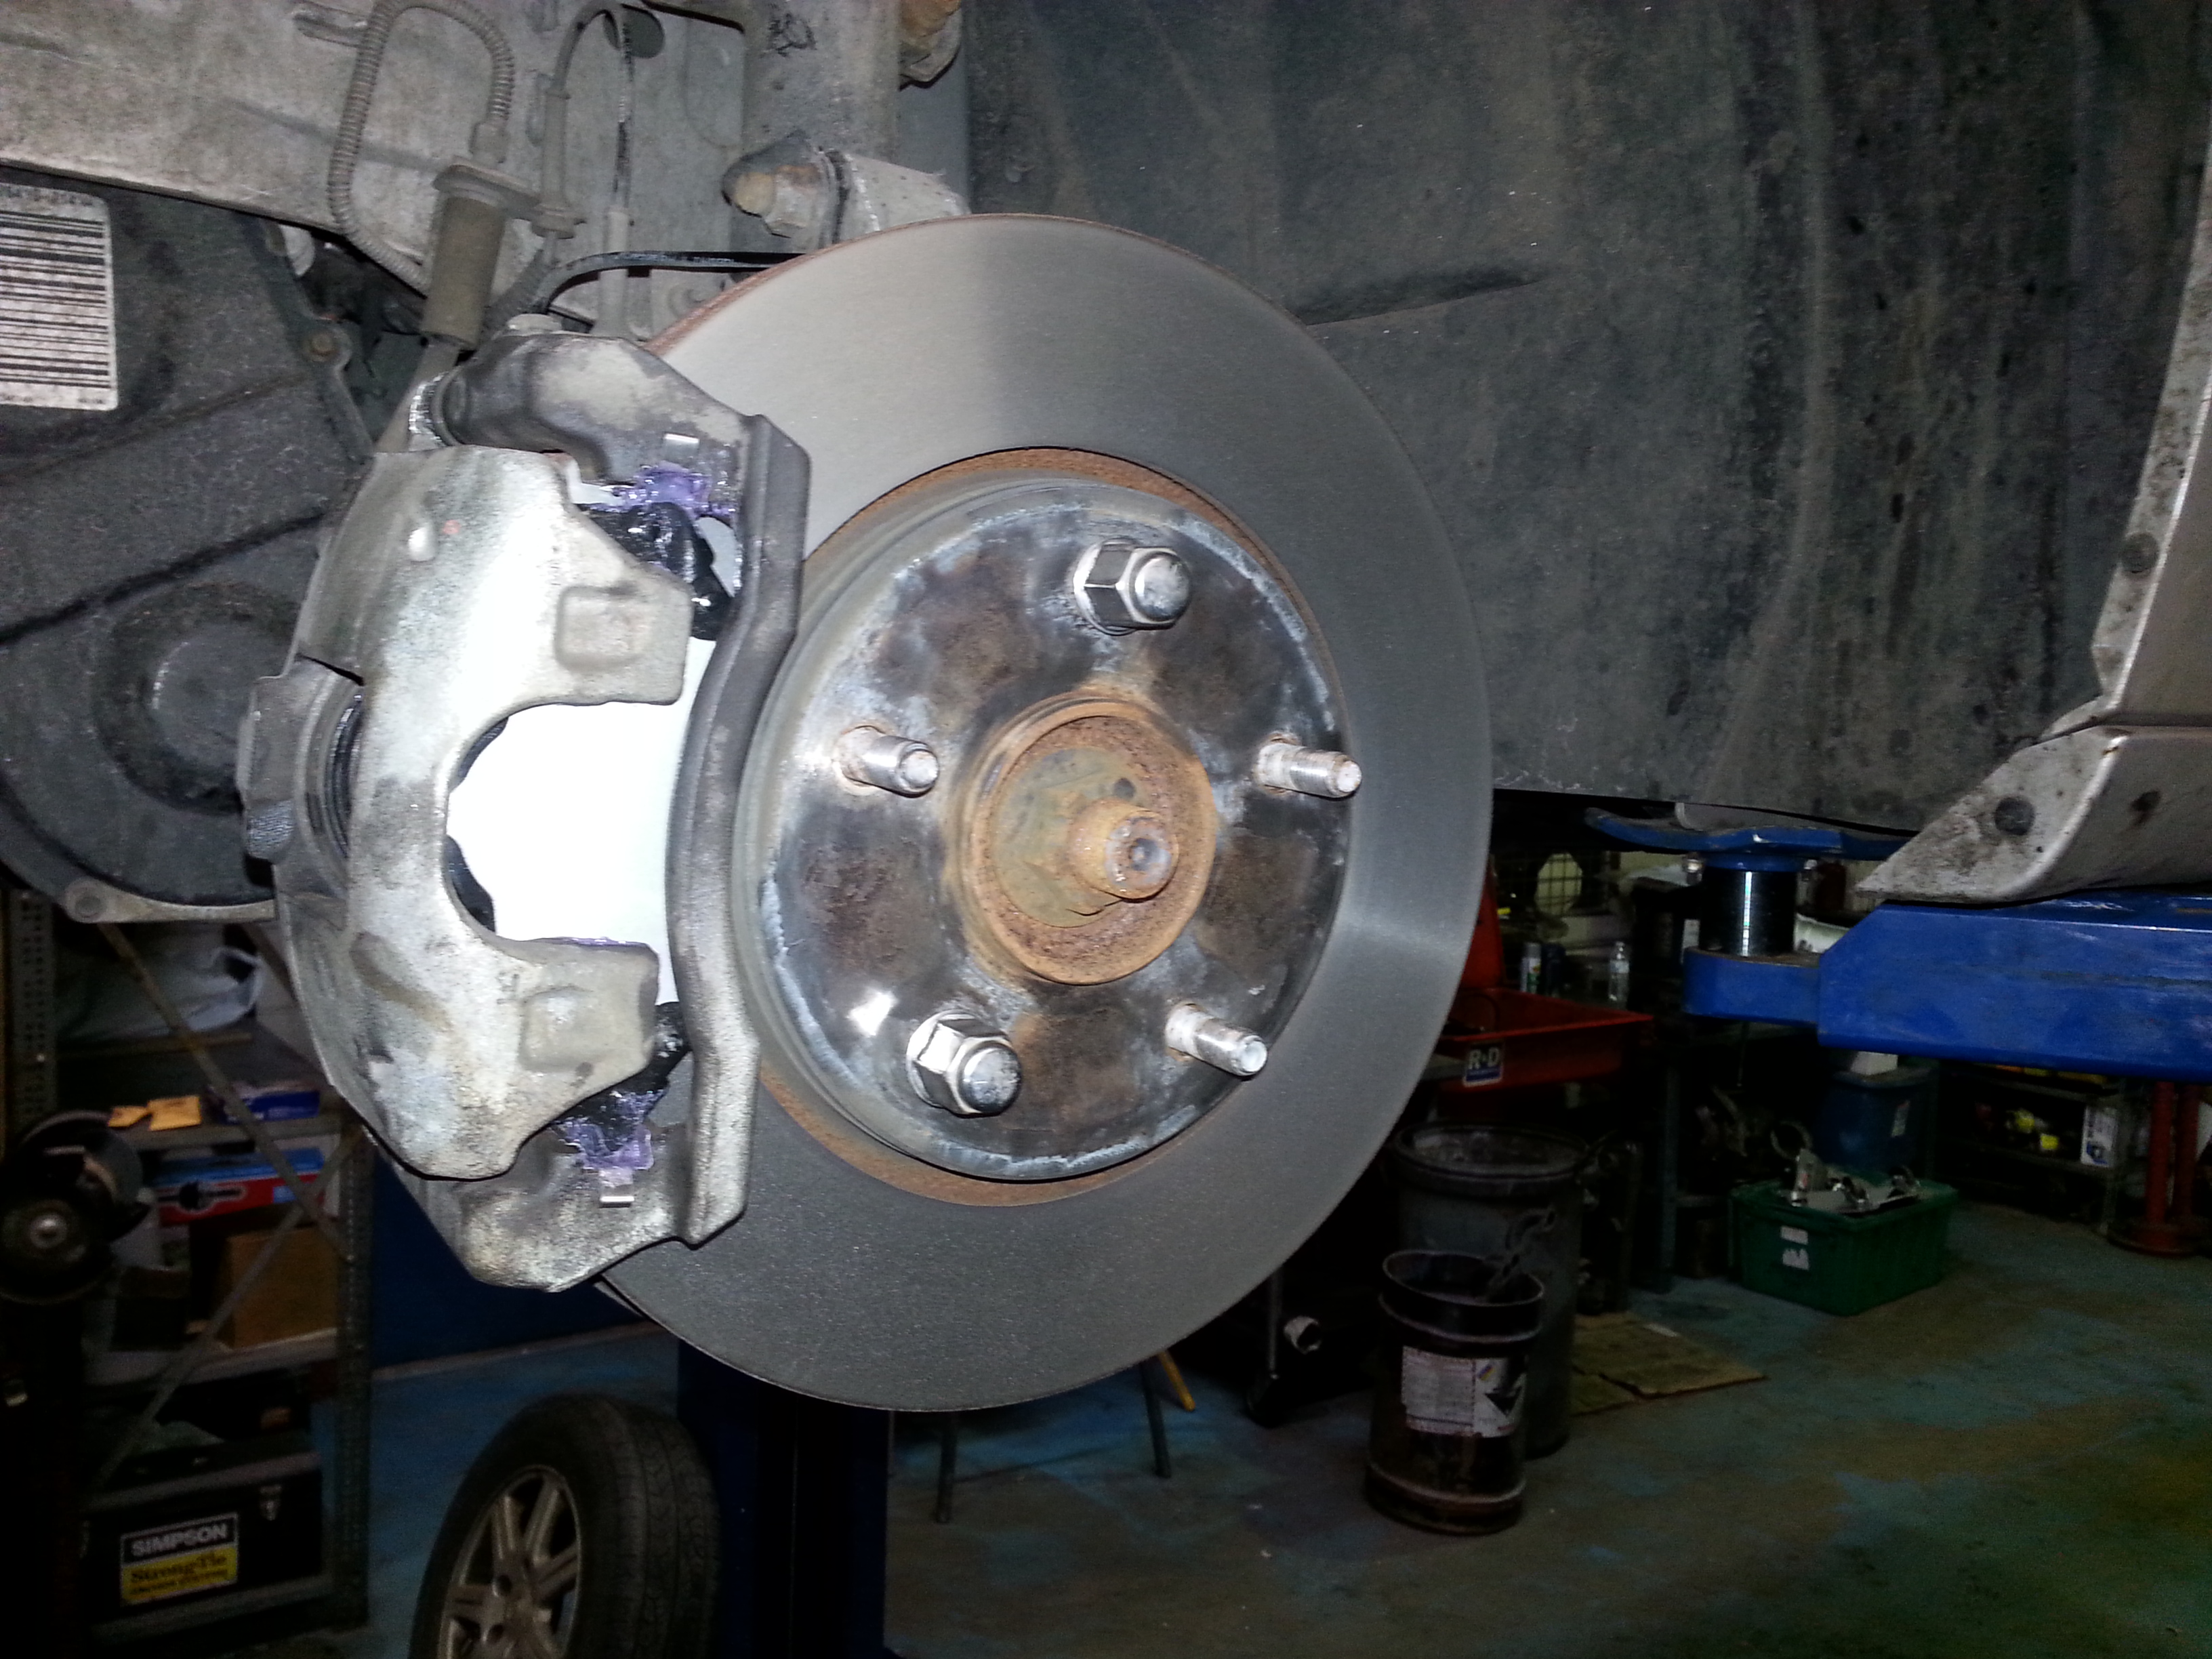 Customer Gets Emergency Brake Repairs at LightHouse Automotive